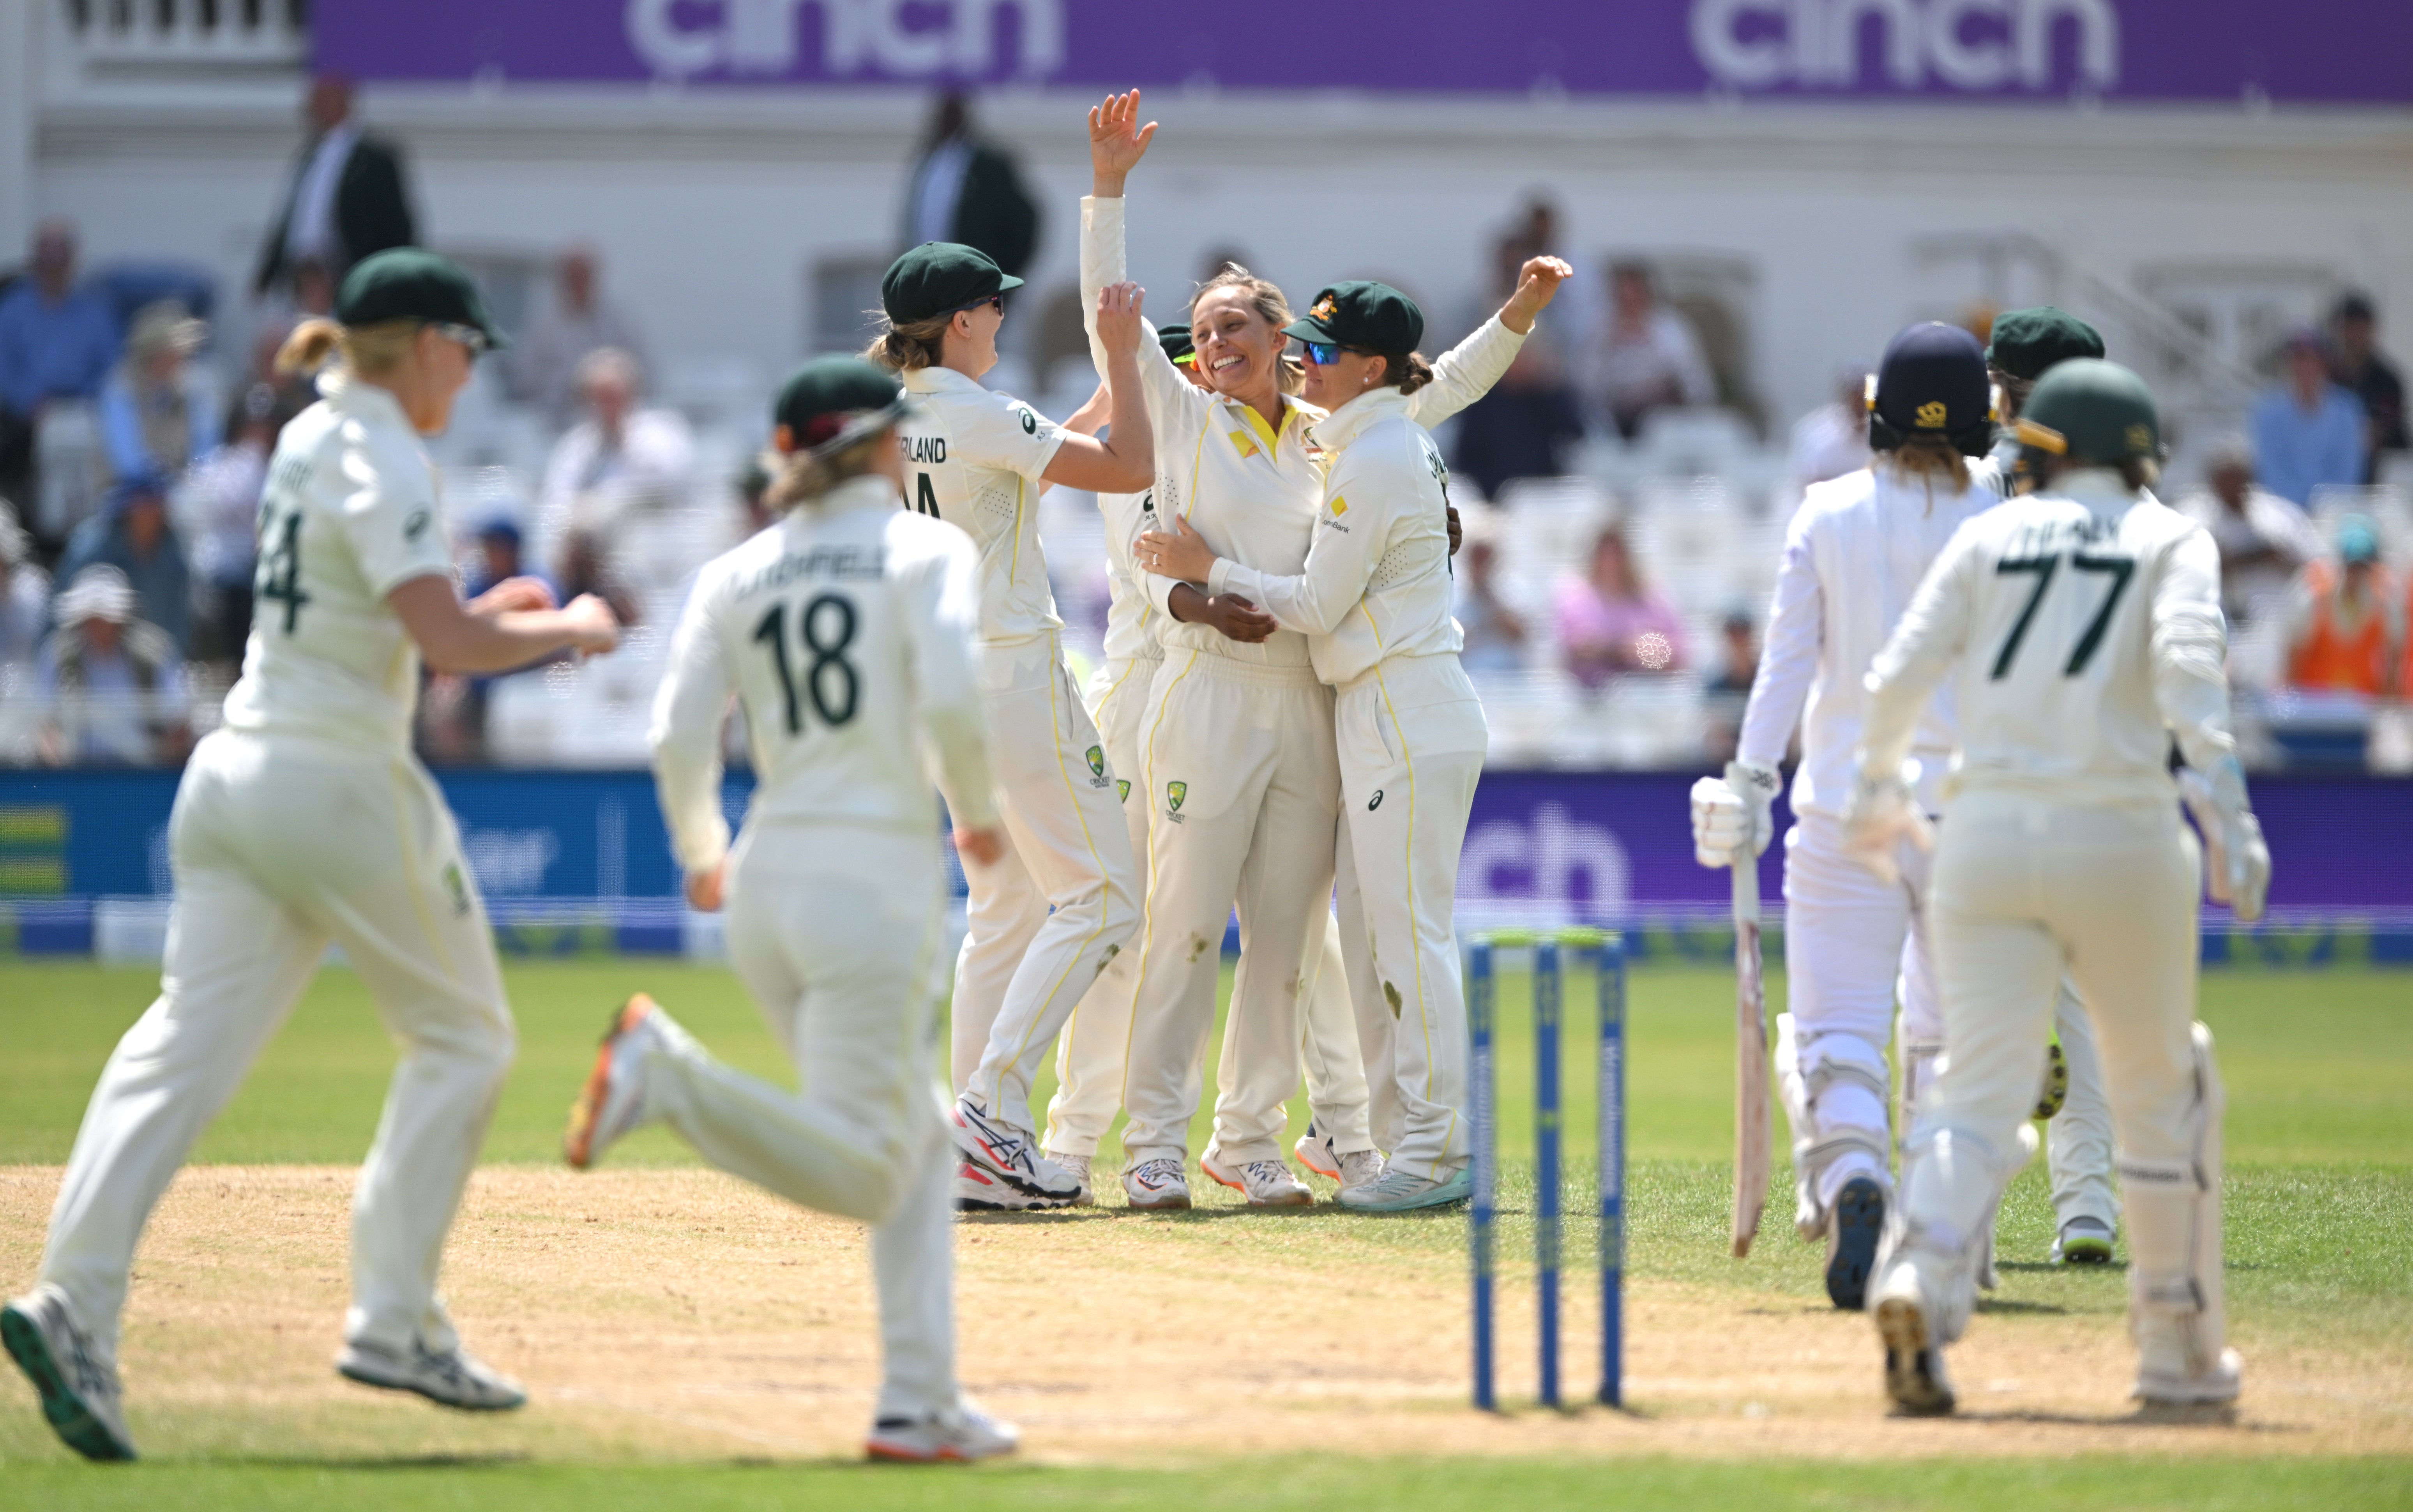 Australia celebrate the final wicket to win the Ashes Test by 89 runs